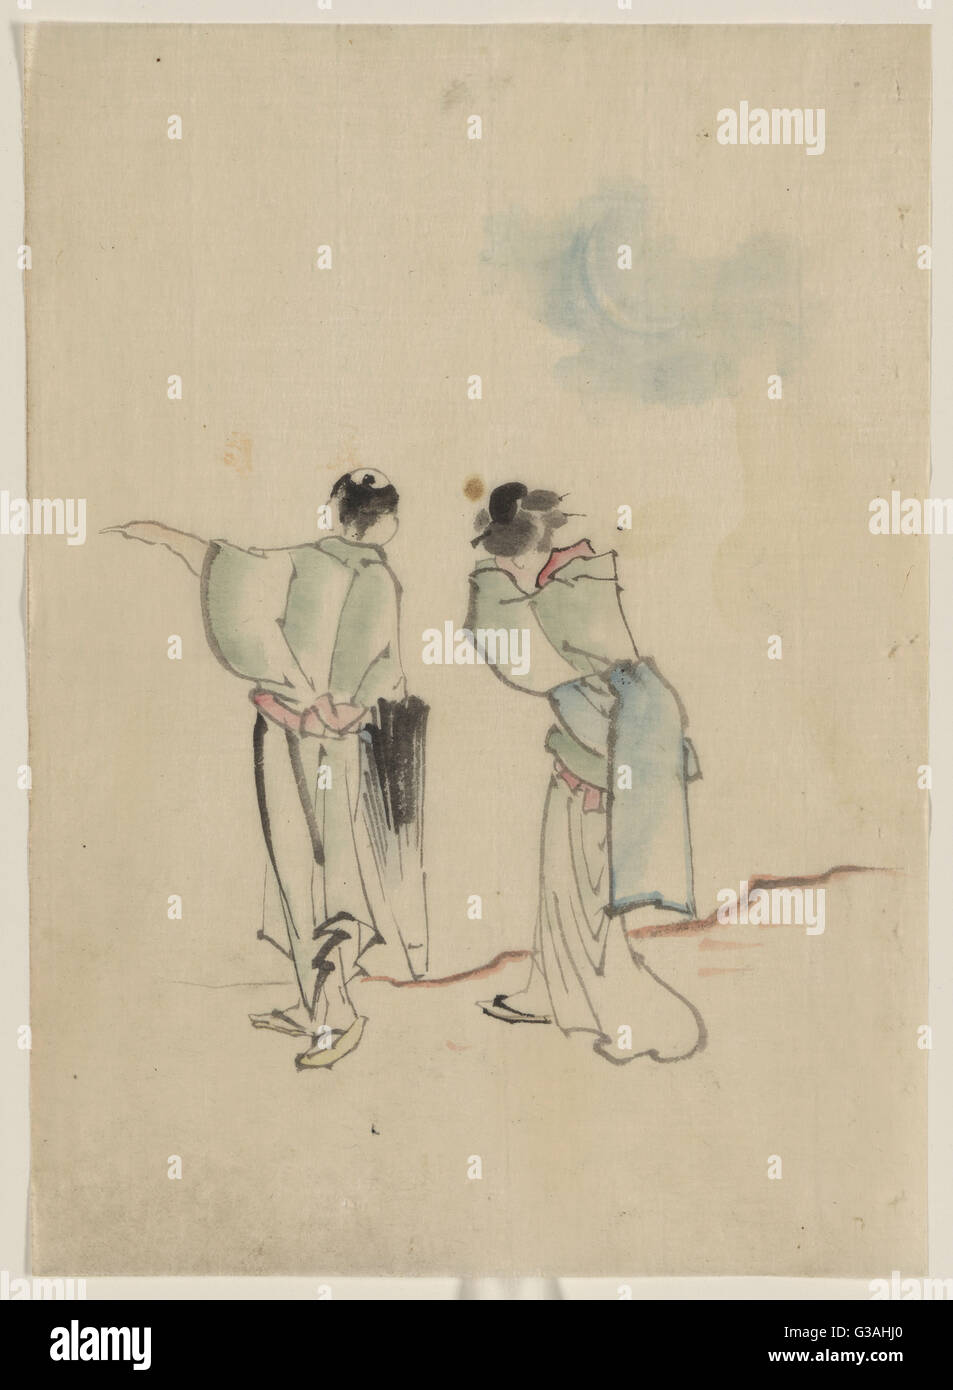 A man and a woman, seen from behind, are looking to where the man is pointing with his left arm, he holds a closed parasol in his right hand; the woman has her hands on her face, it is unclear whether she is peering into the distance or crying. Date betwe Stock Photo